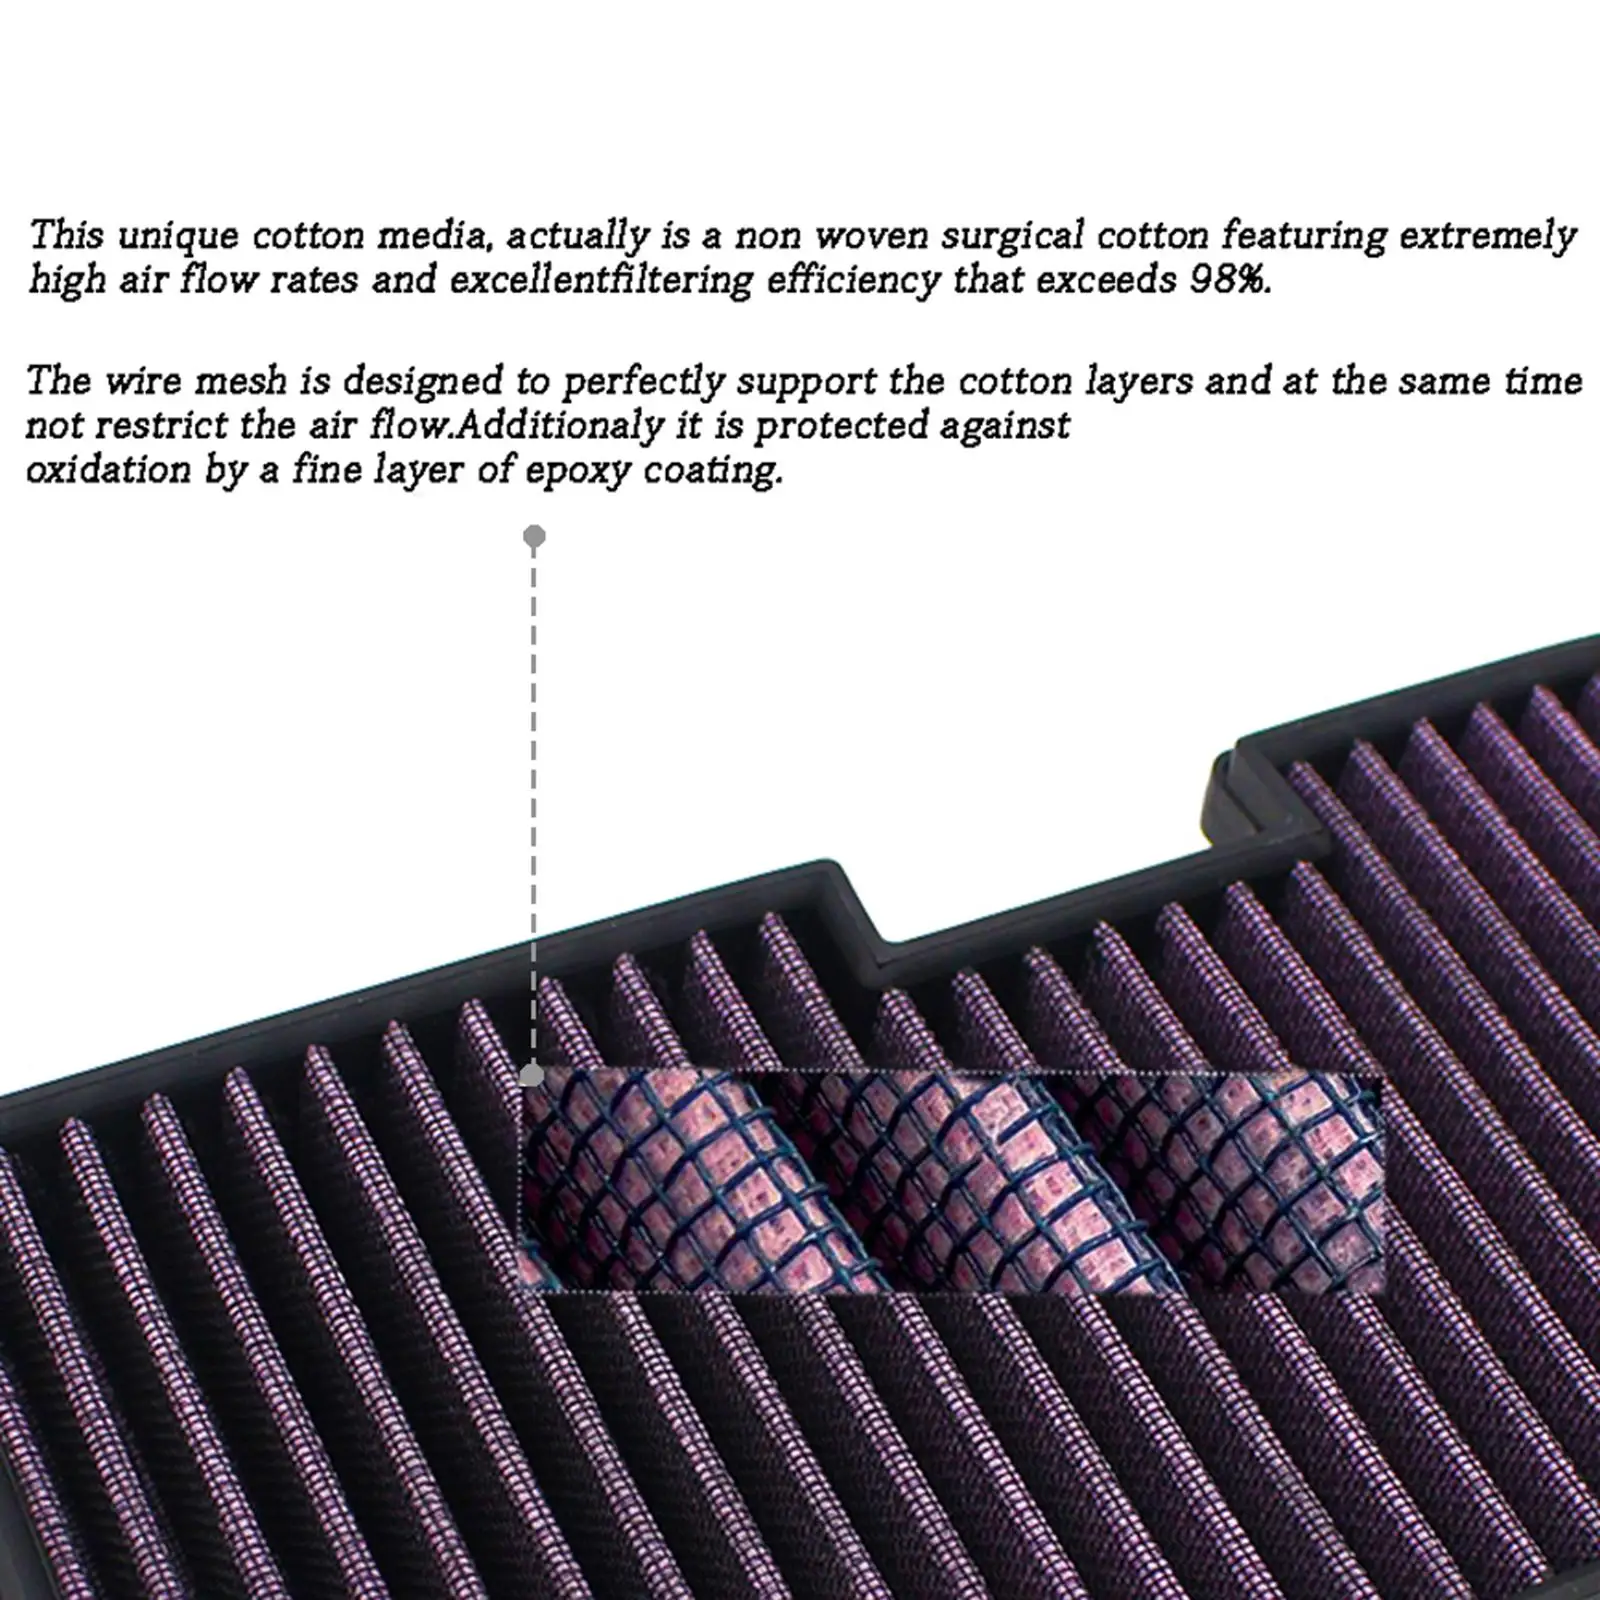 Motorbike Air Filter Intake Easy to Install Motorcycle Parts Replaces Durable